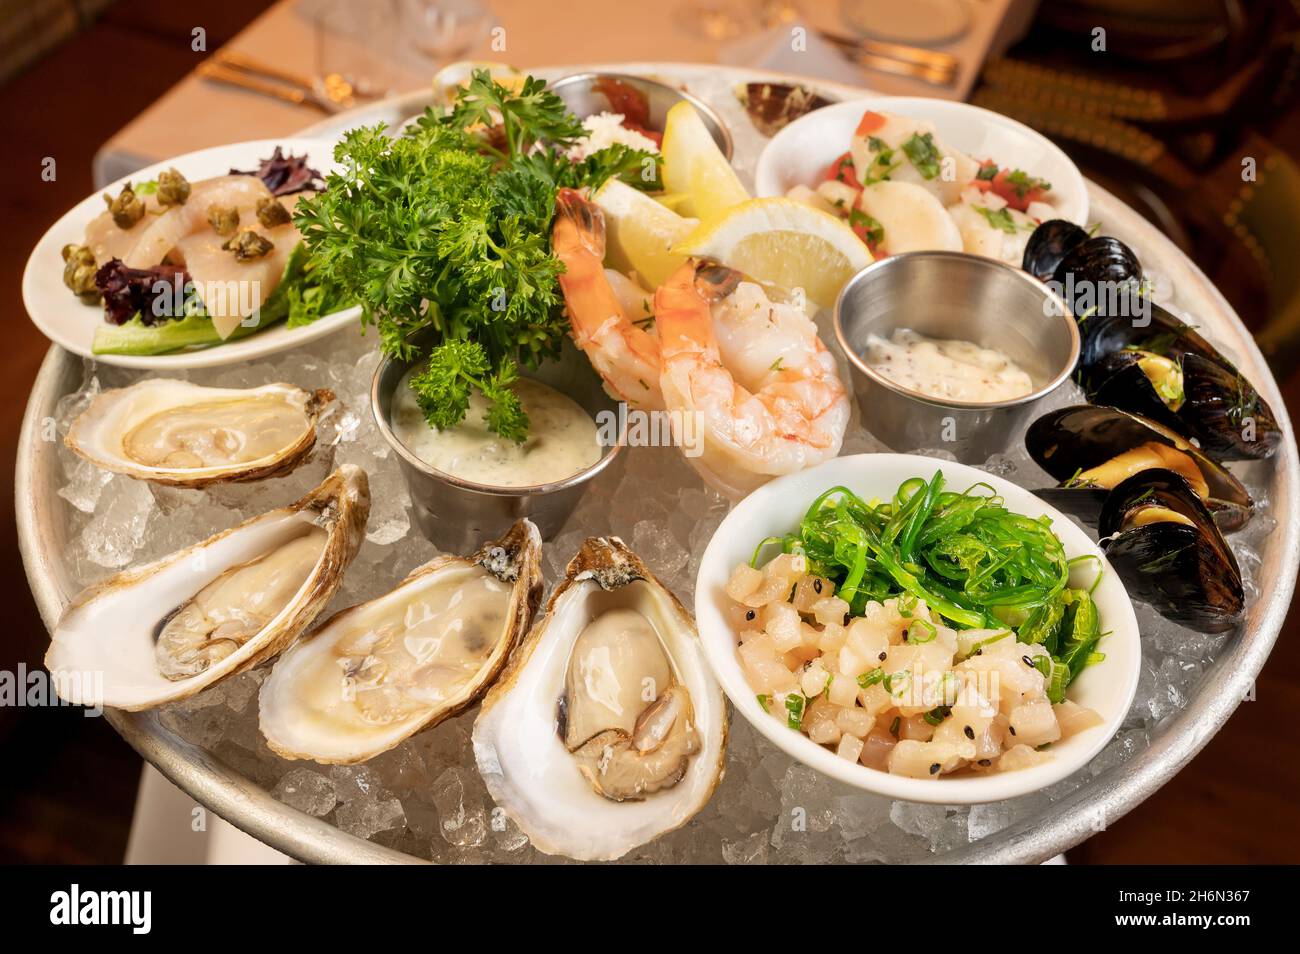 Chilled Seafood Platter, which includes local oysters, marinated mussels and clams, prawns, albacore tuna crudo, scallop ceviche, ahi tuna poke. Stock Photo